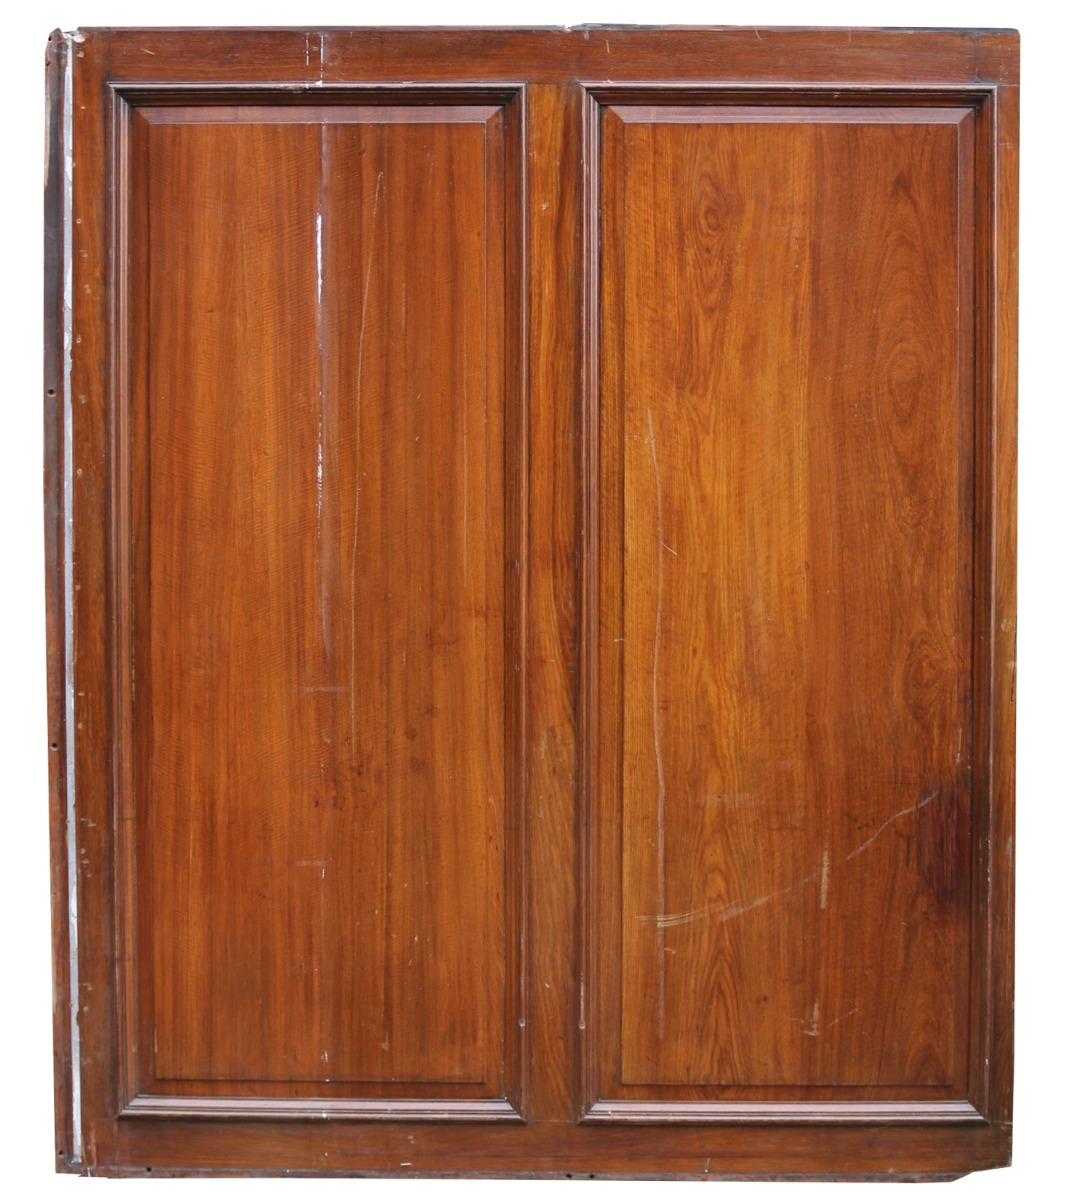 A twelve linear meter (40 feet) run of full height teak wall panelling, removed from a room of the RAC
Clubhouse in Pall Mall, London. We have two matching sets of double doors available separately.
We have stripped some doors from the same